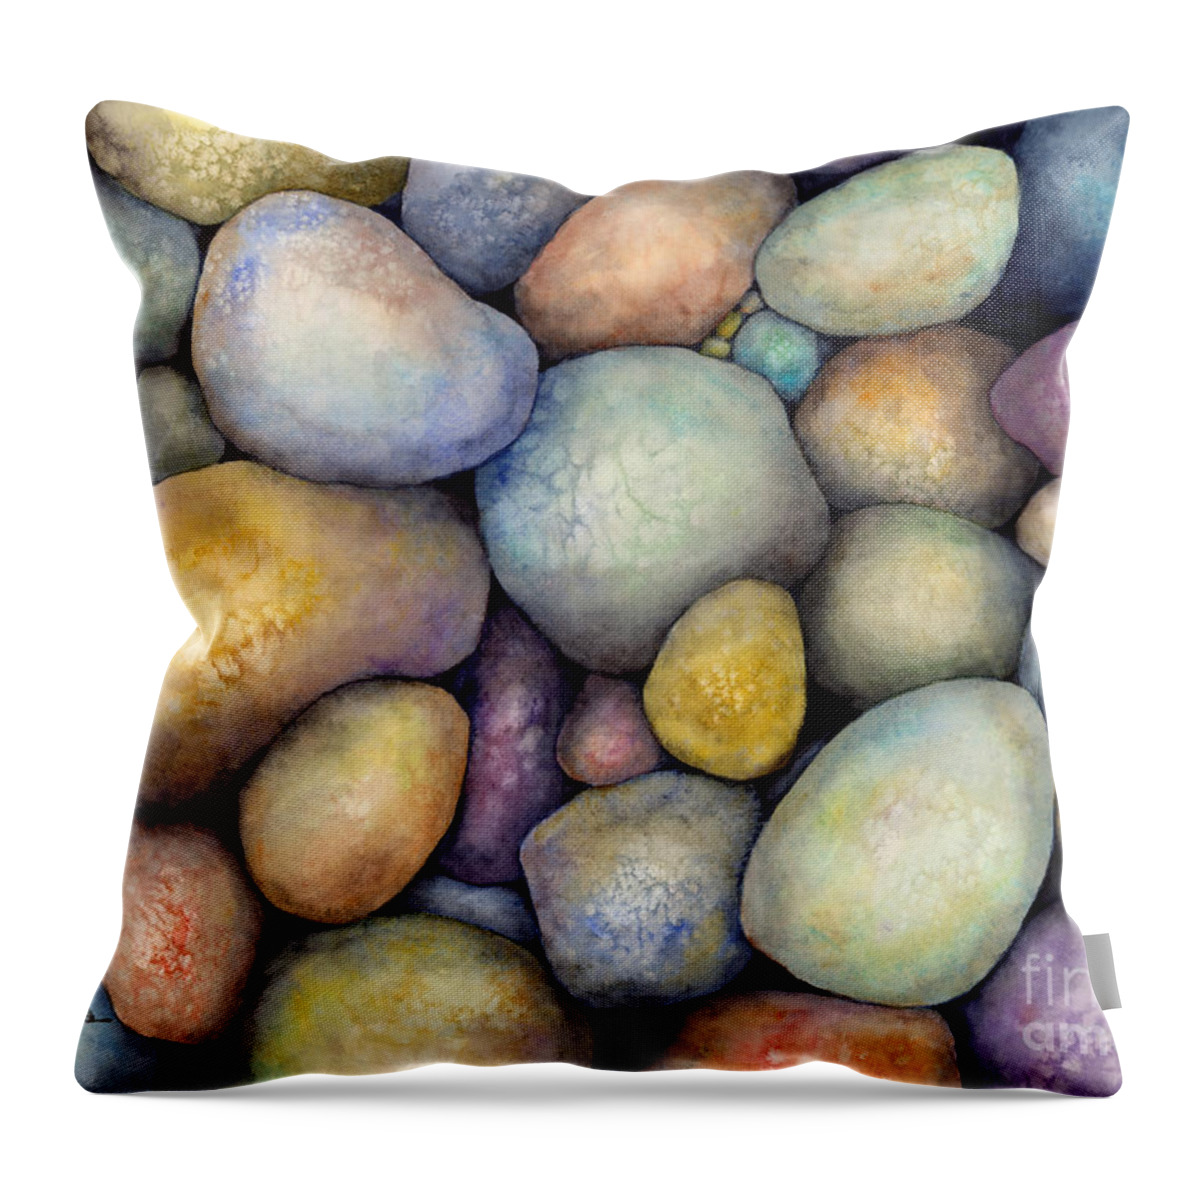 Rock Candy Throw Pillow featuring the painting Rock Candy by Hailey E Herrera